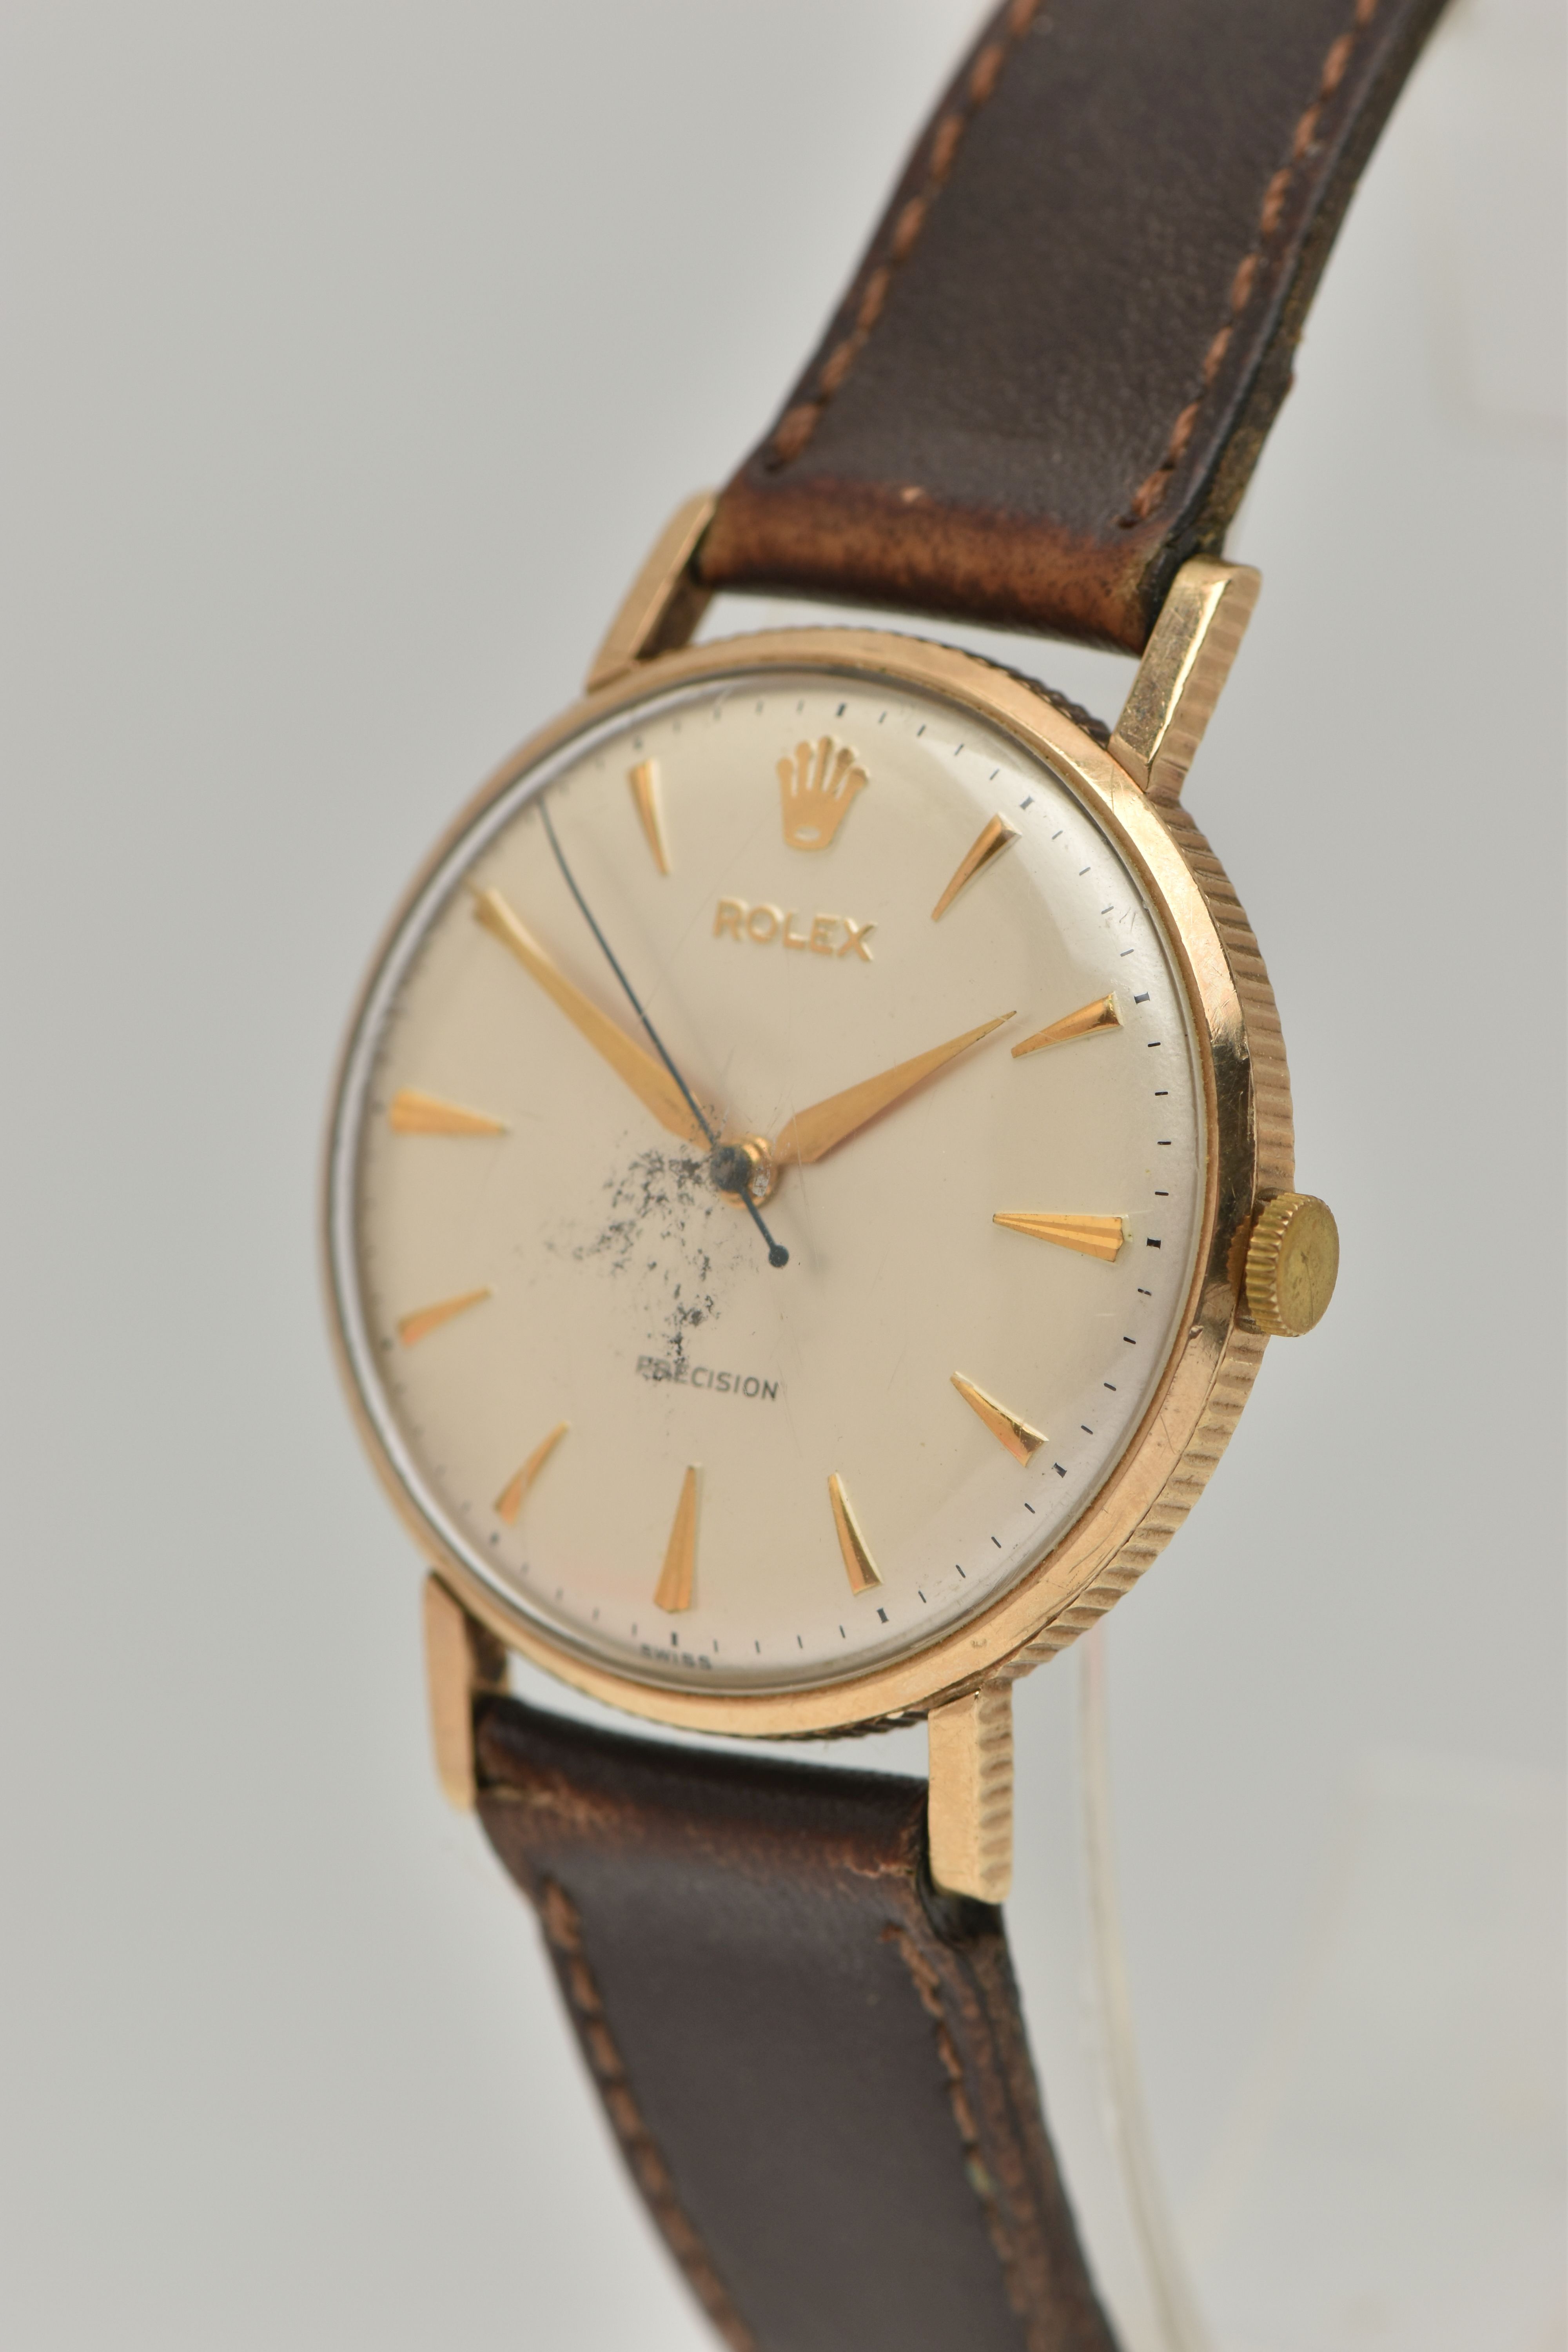 A 9CT GOLD 'ROLEX' WRISTWATCH, hand wound movement, round white dial, signed 'Rolex Precision', - Image 3 of 6